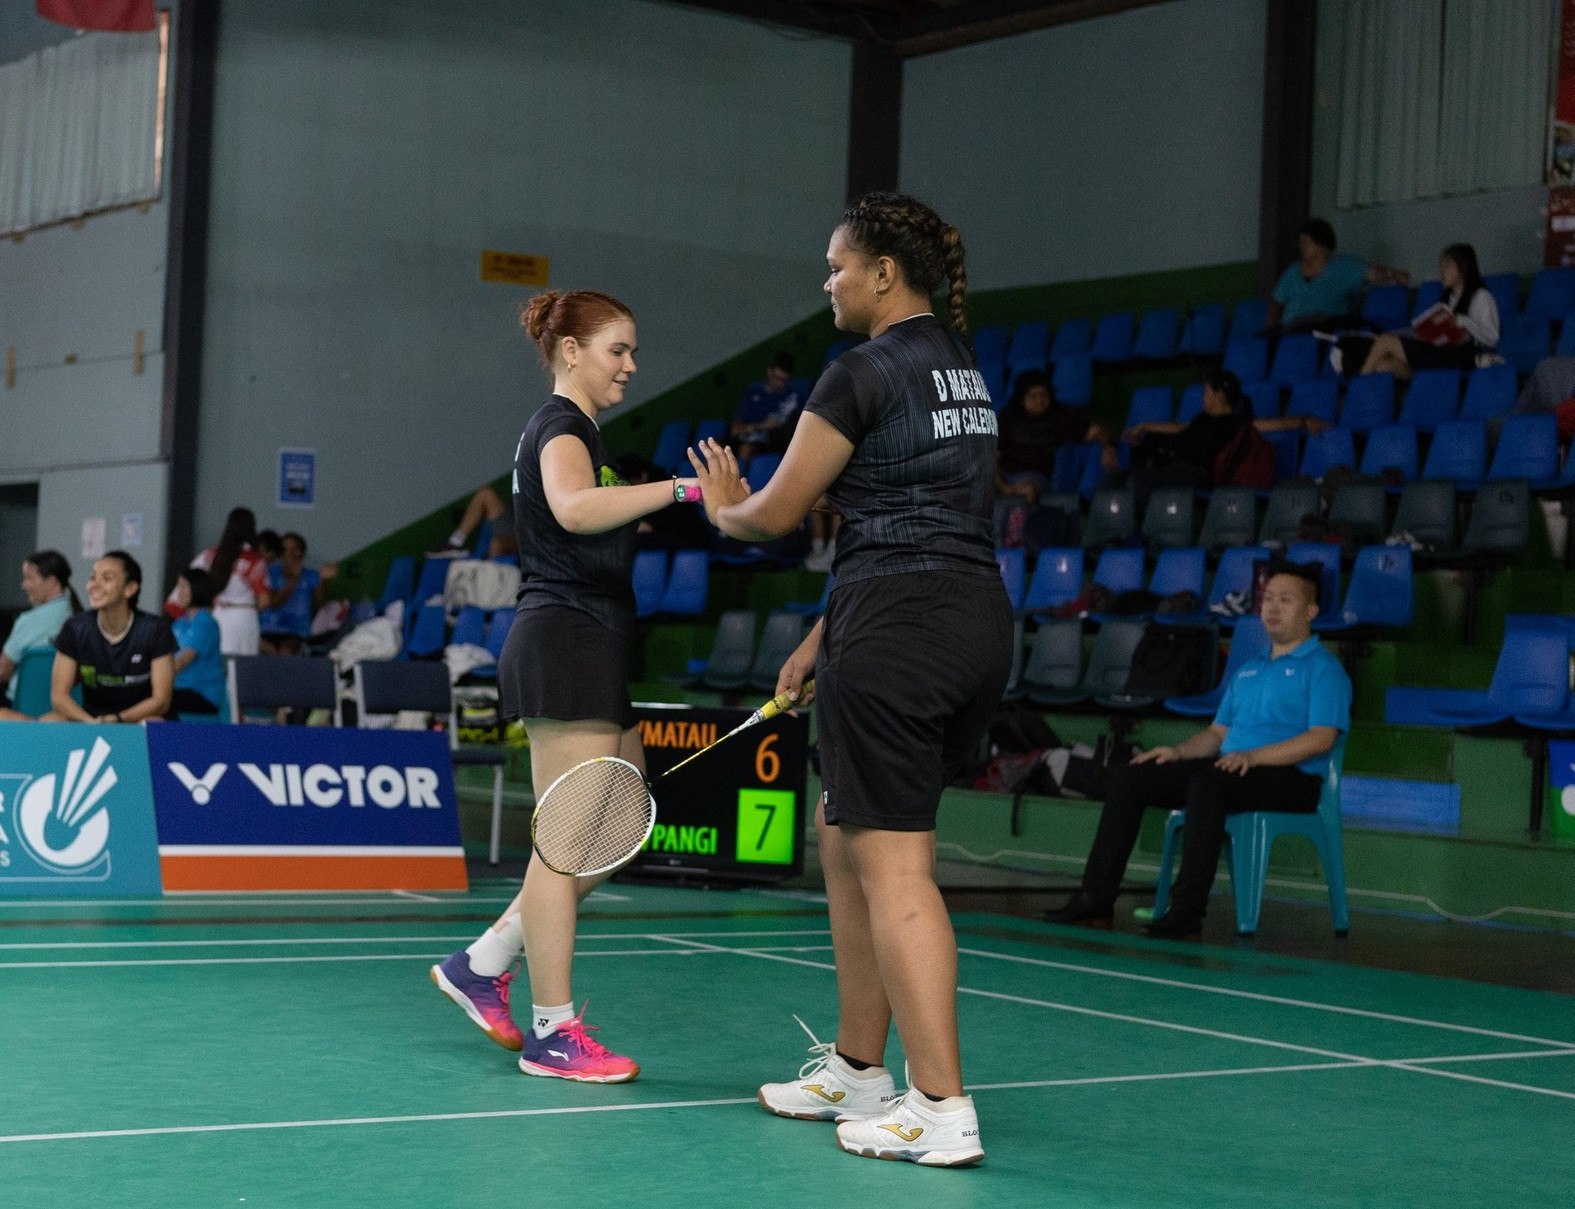 New Caledonia enjoyed a good day with two victories from two on the opening day of mixed doubles action at the Oceania Badminton Championships in Auckland ©Paul Foxall